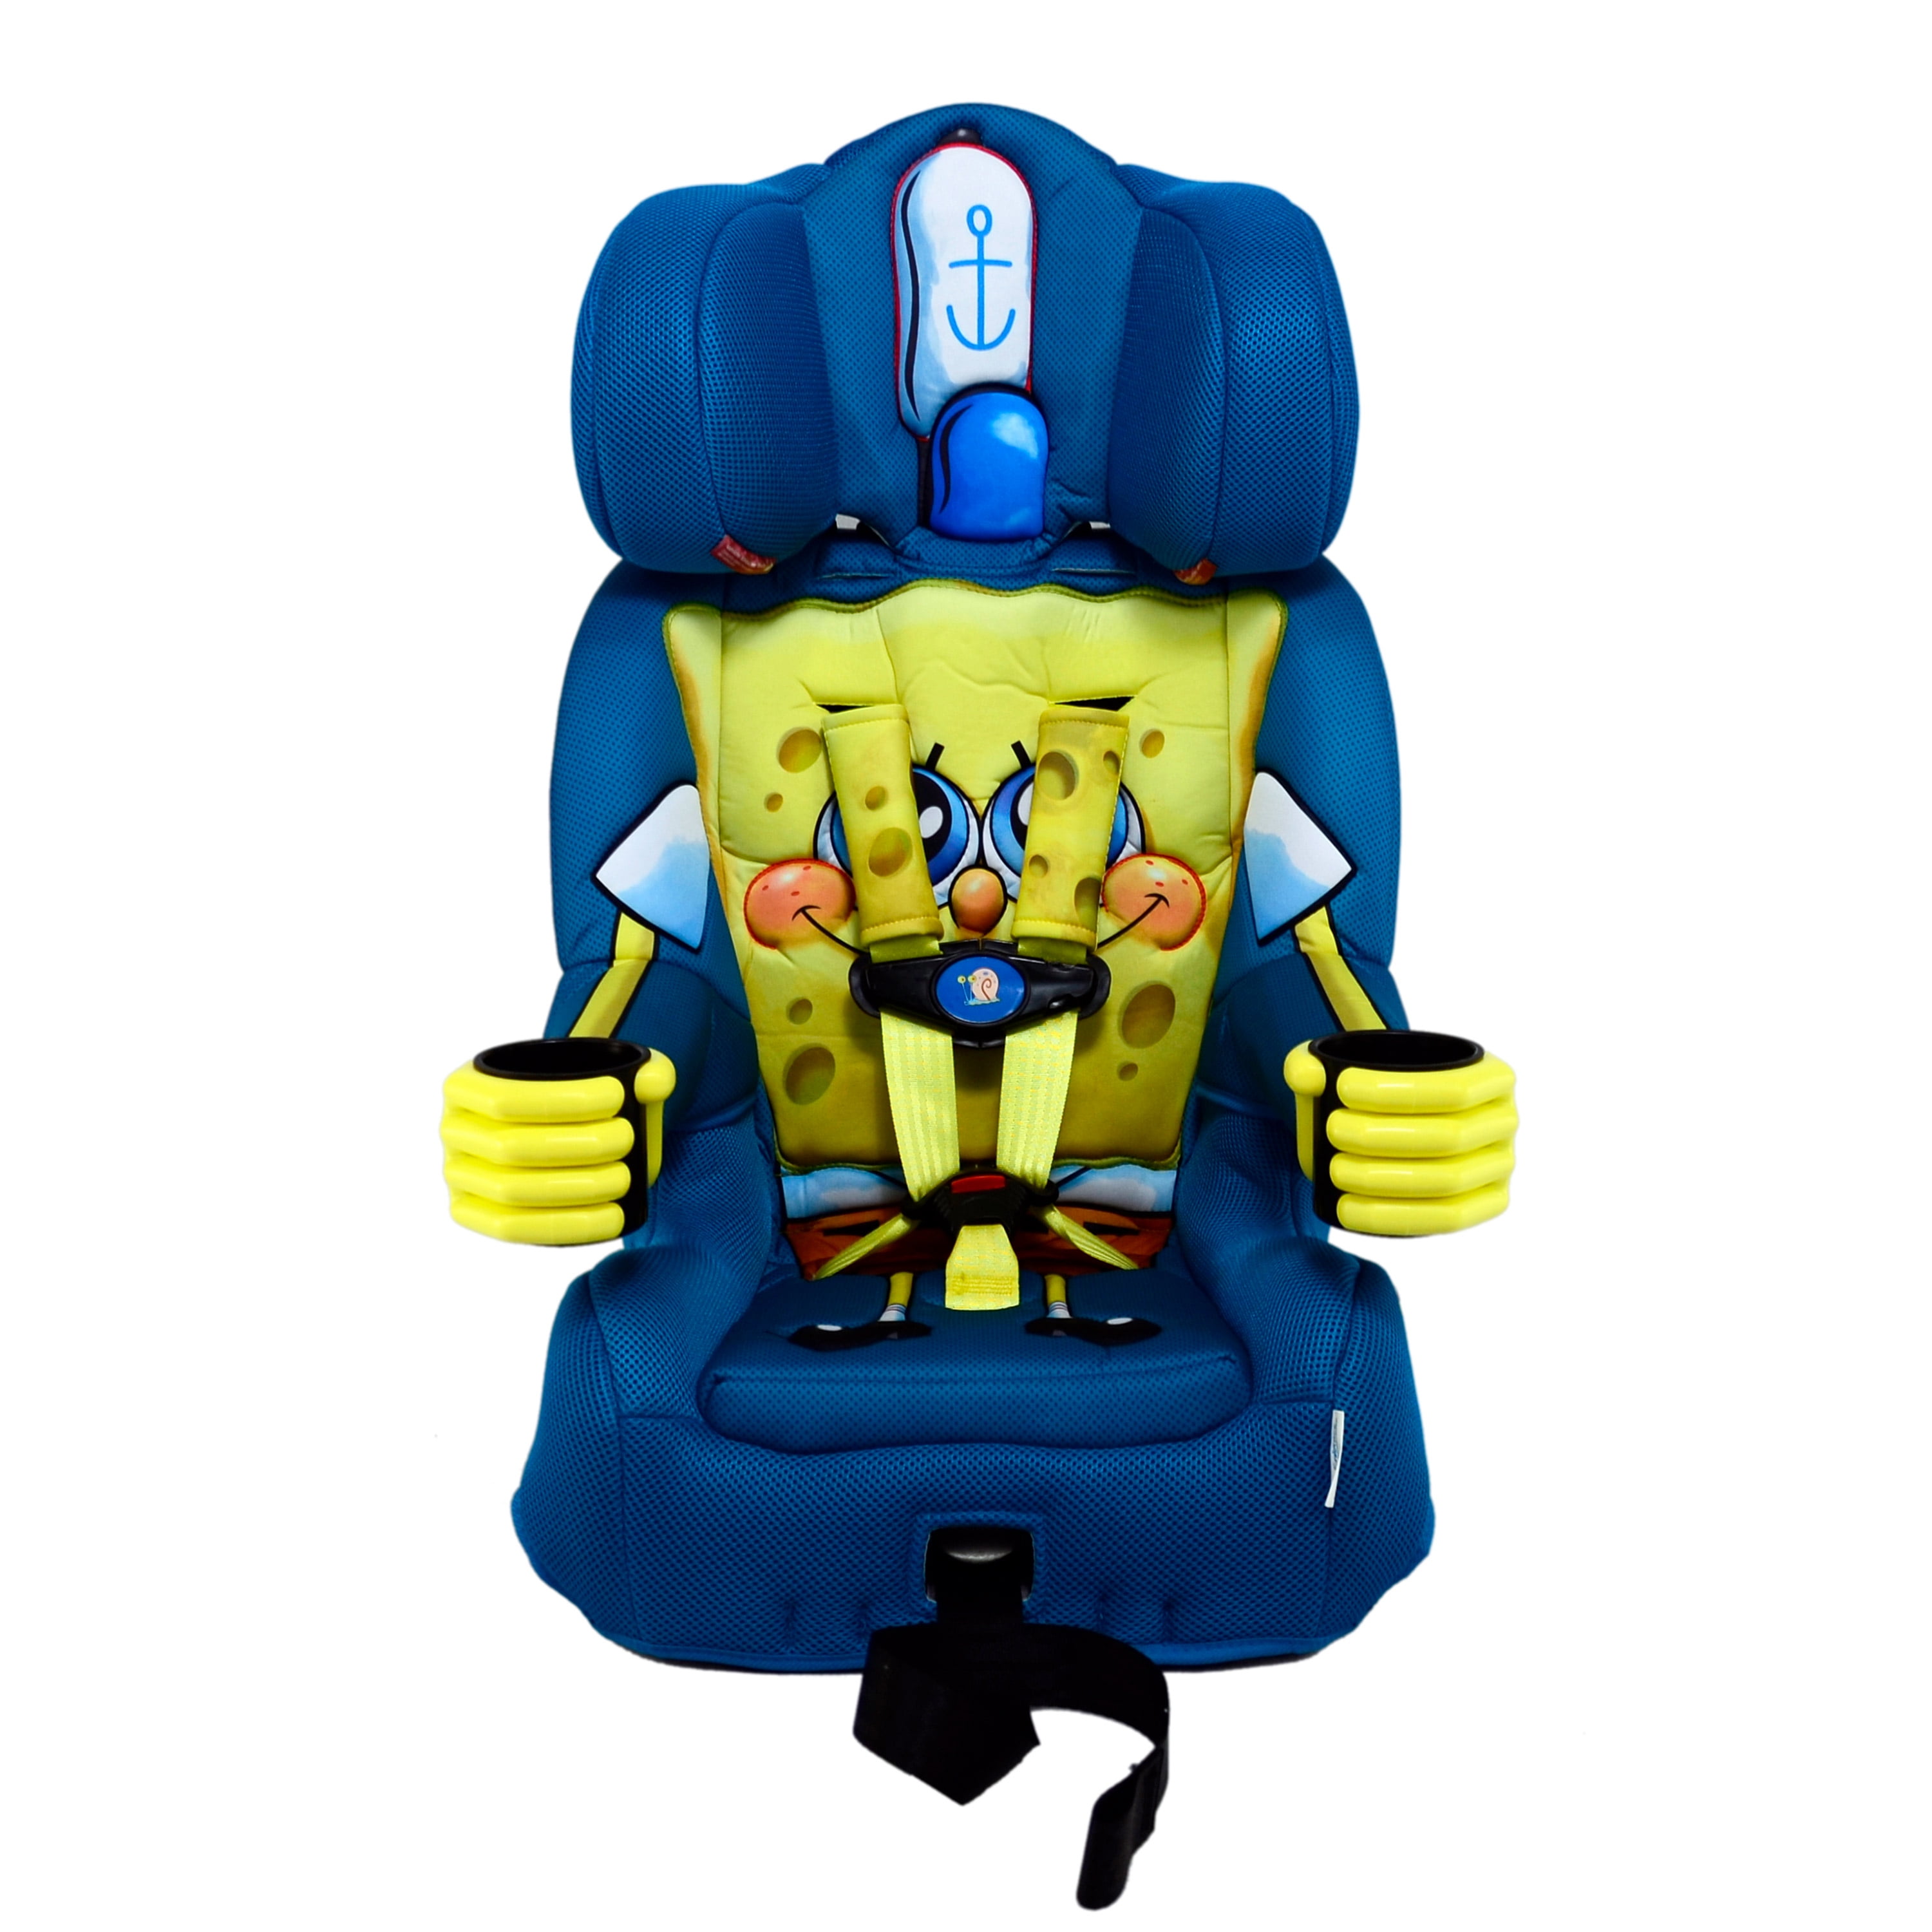 inflatable booster seat walmart